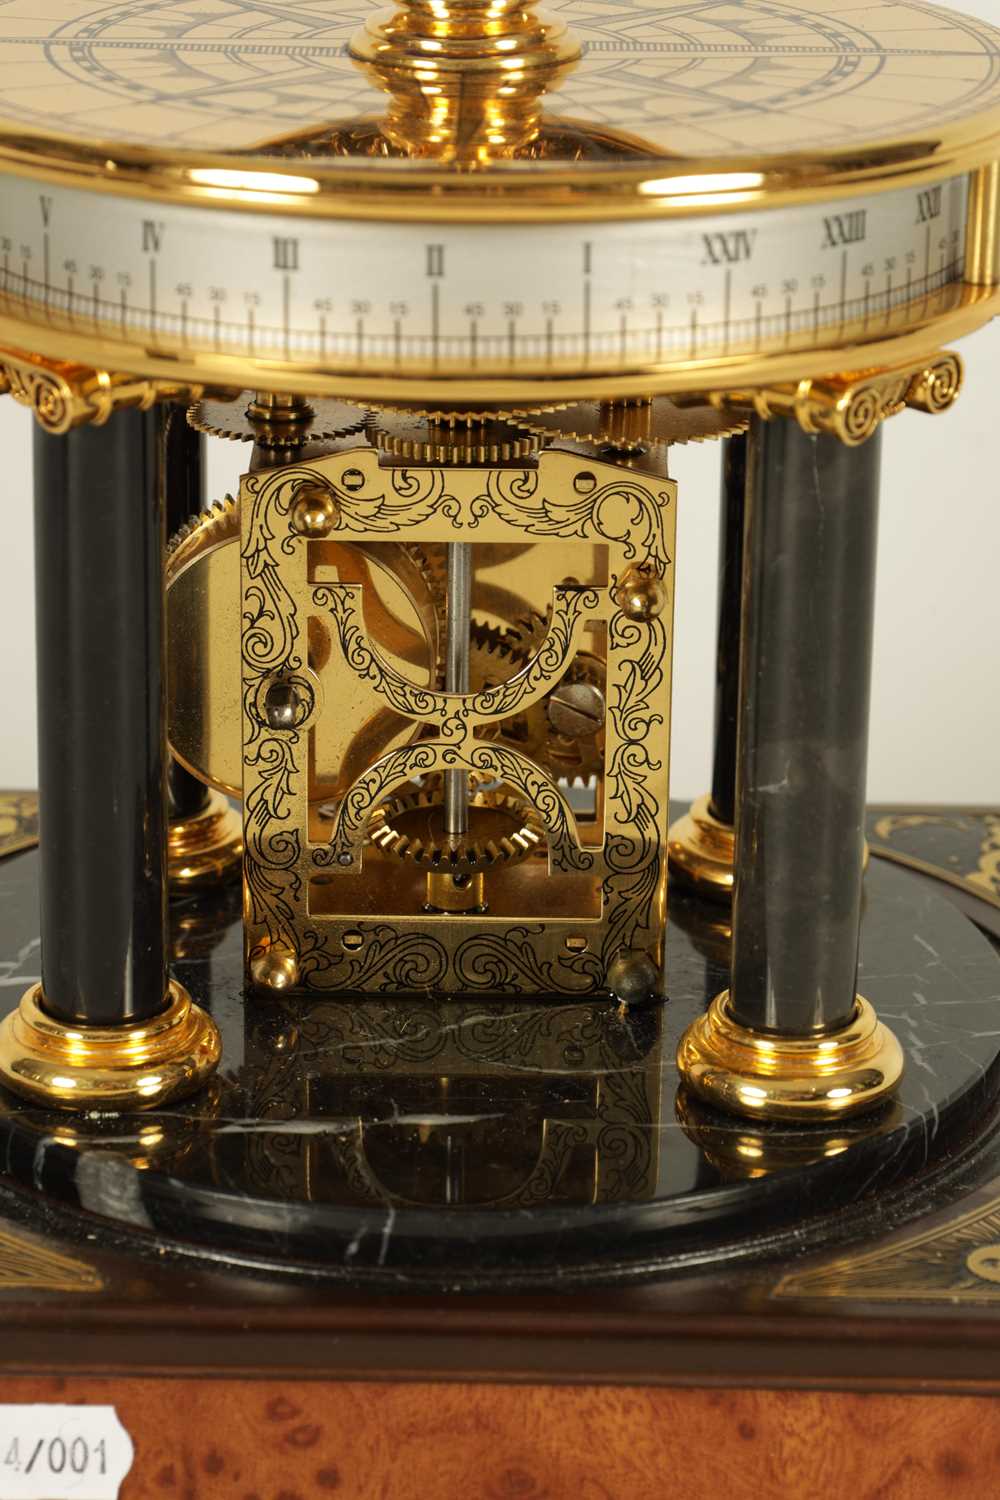 A ROYAL GEOGRAPHICAL SOCIETY MILLENNIUM CLOCK - Image 12 of 15